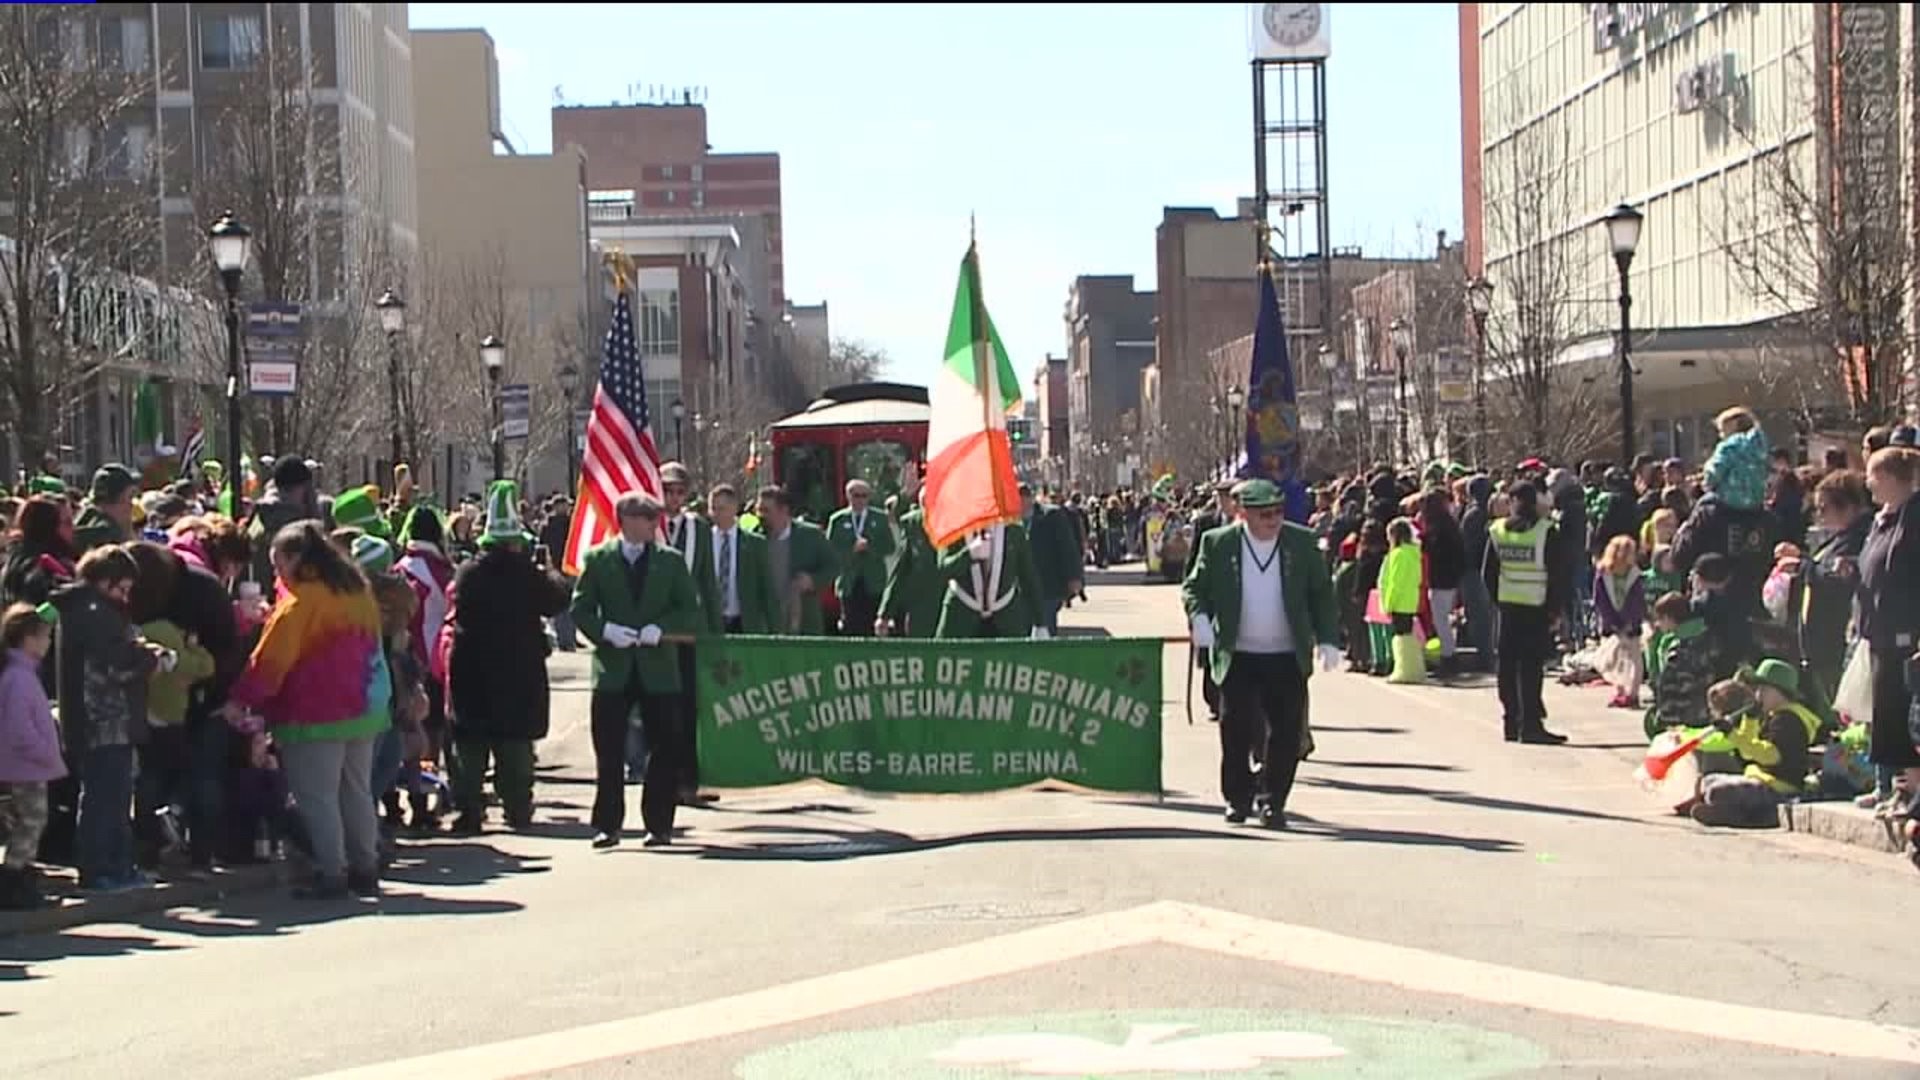 St. Patrick’s Day Parade in WilkesBarre